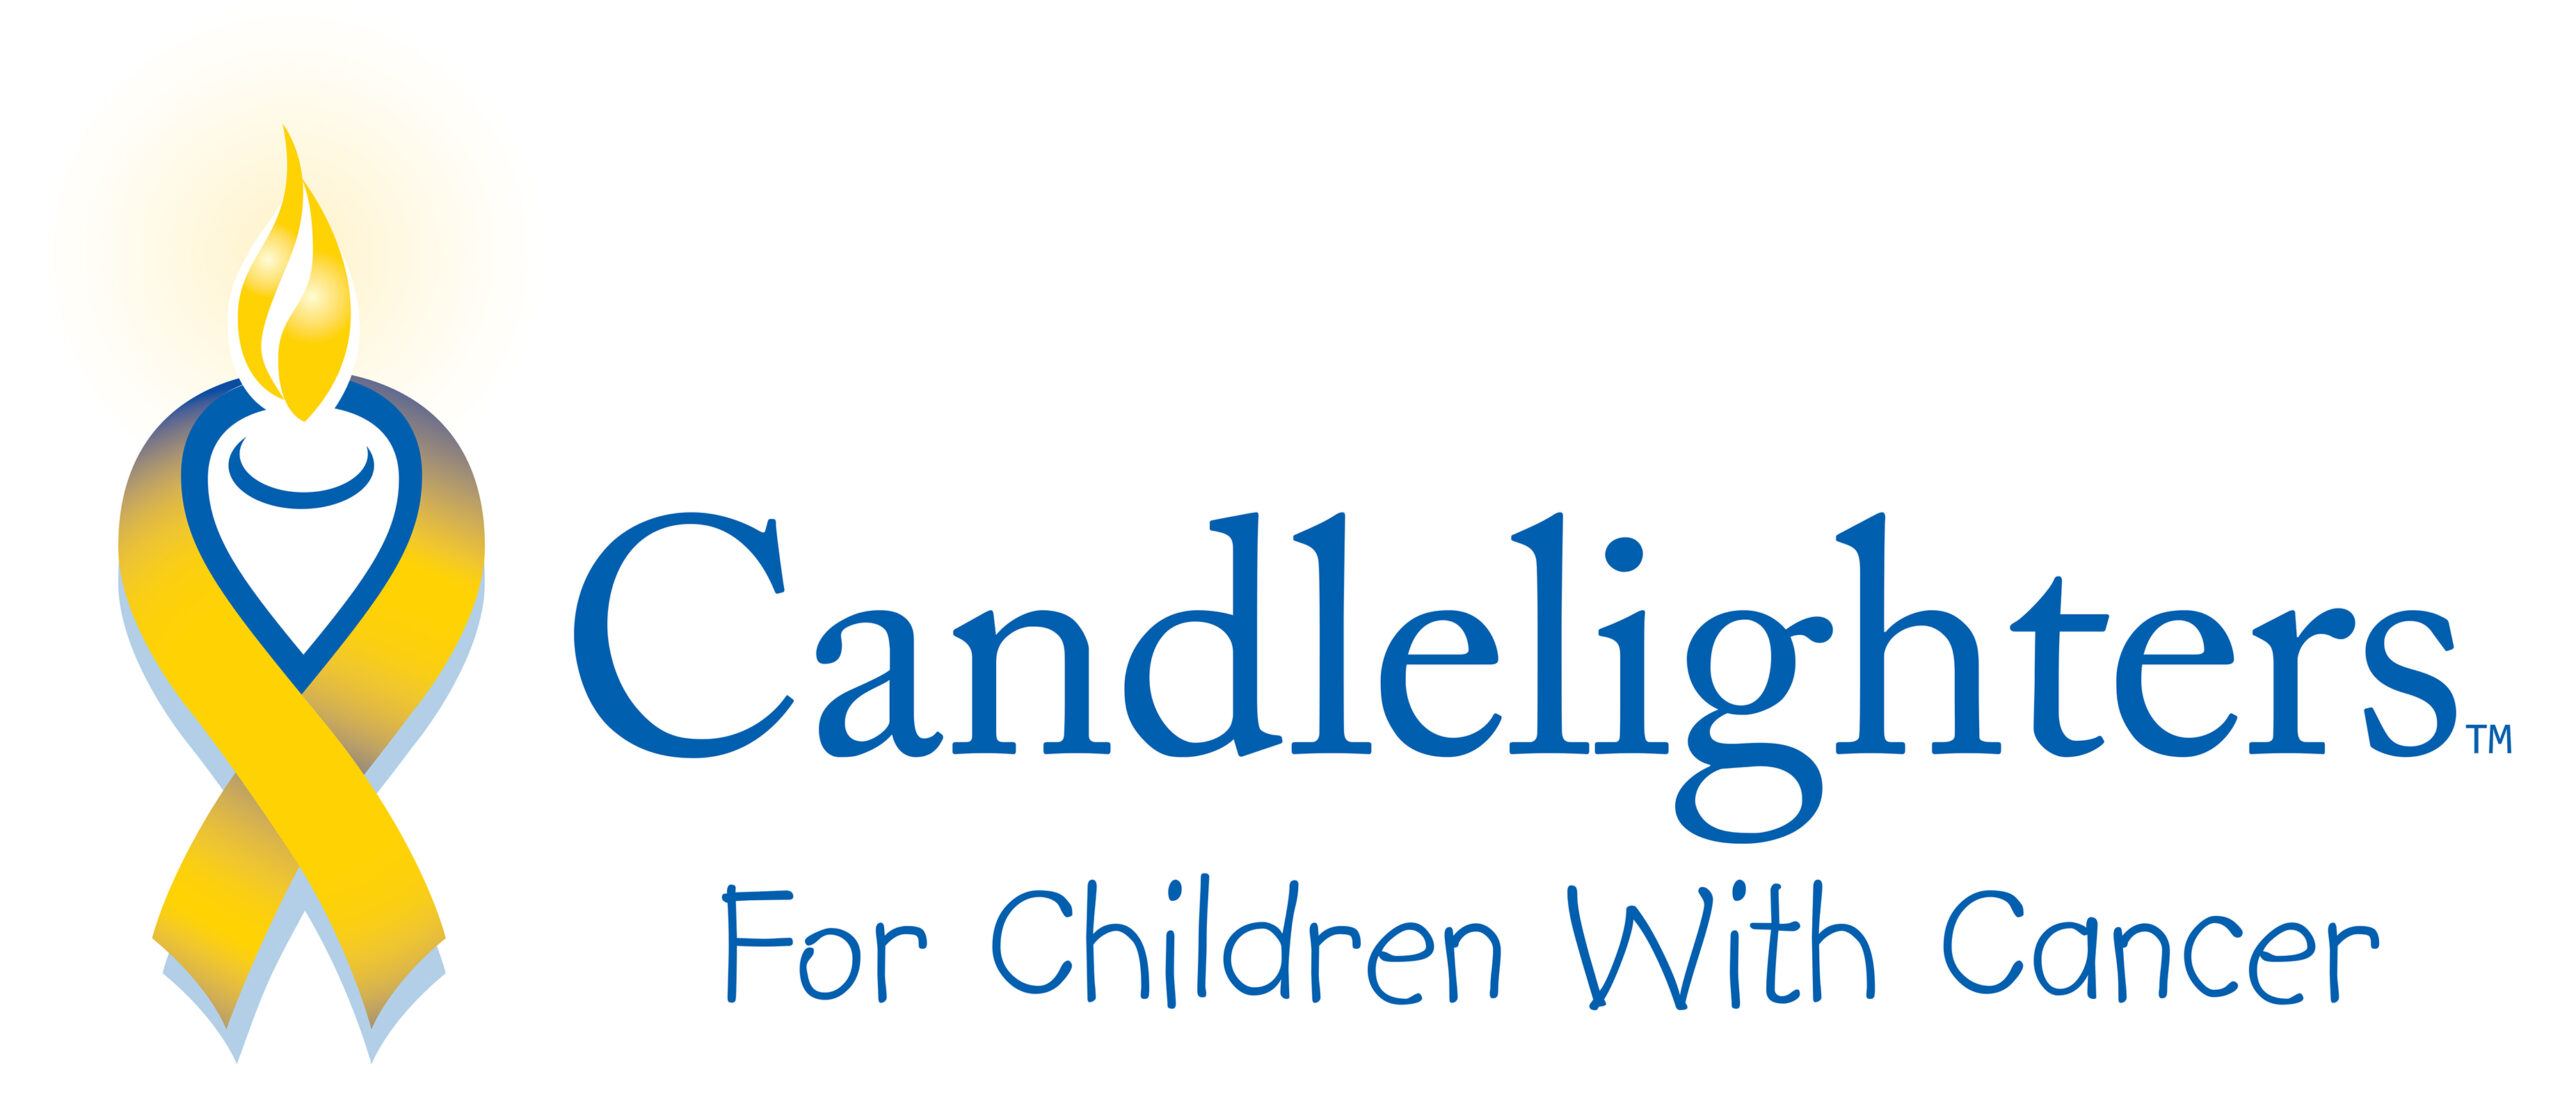 Candlelighters logo